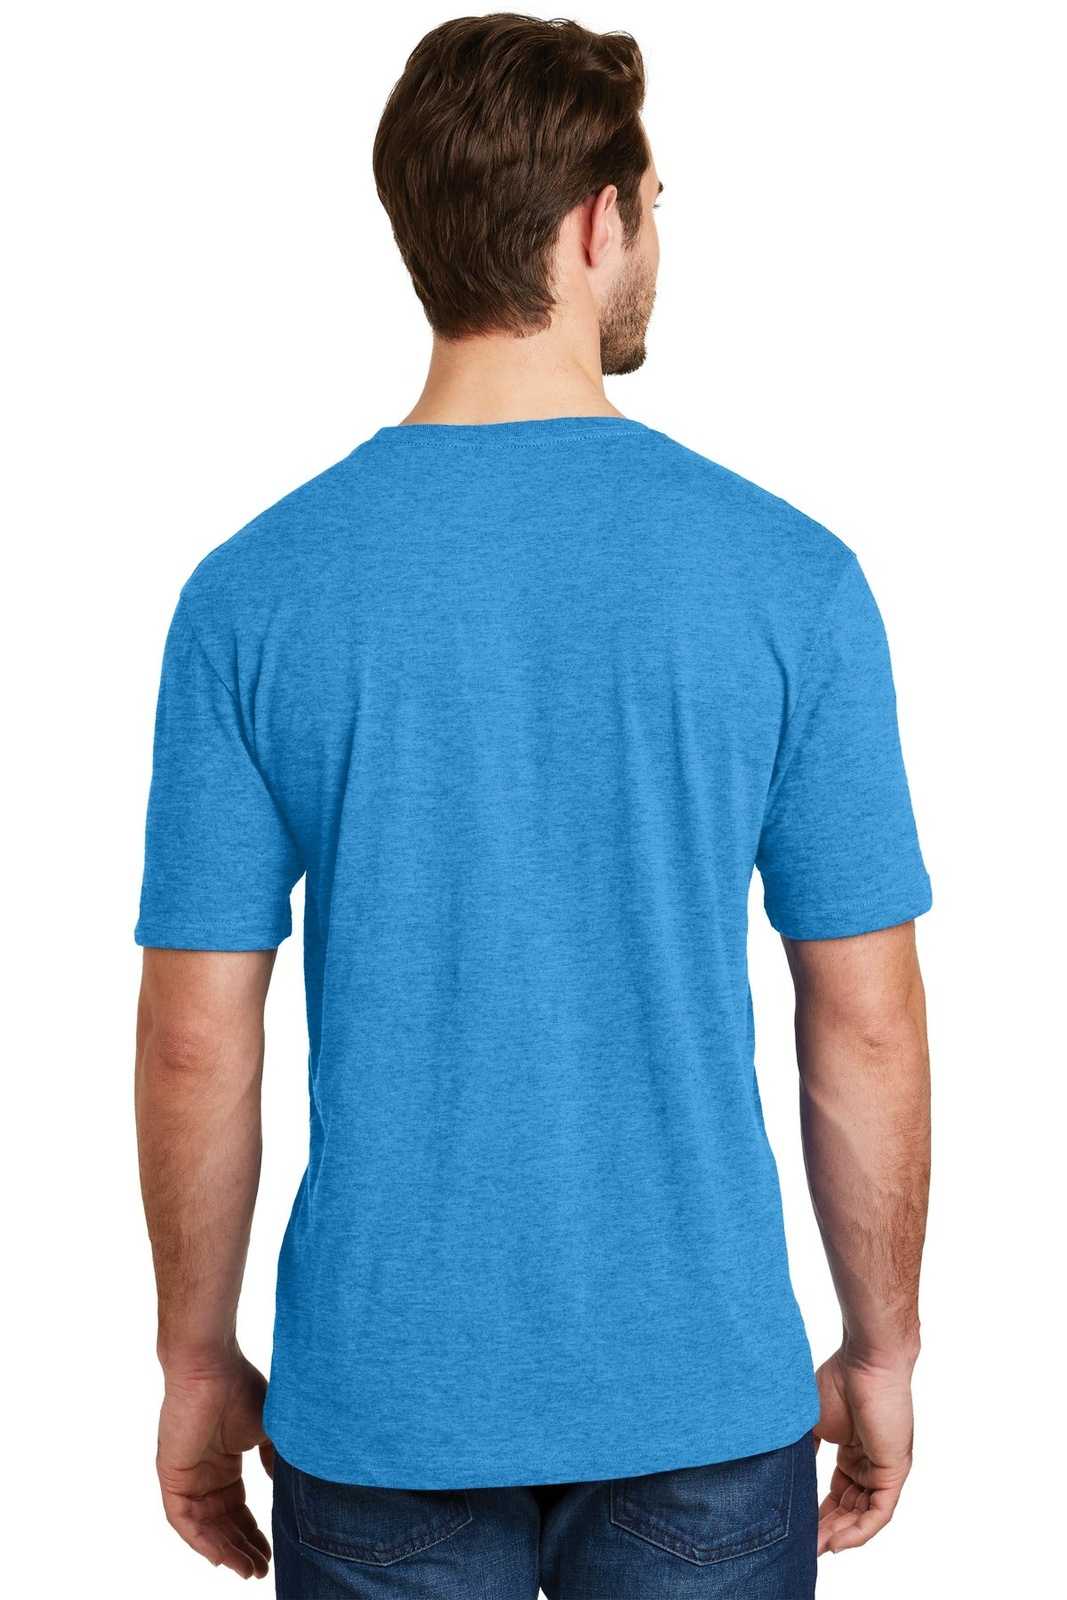 District DM108 Perfect Blend Tee - Heathered Bright Turquoise - HIT a Double - 1